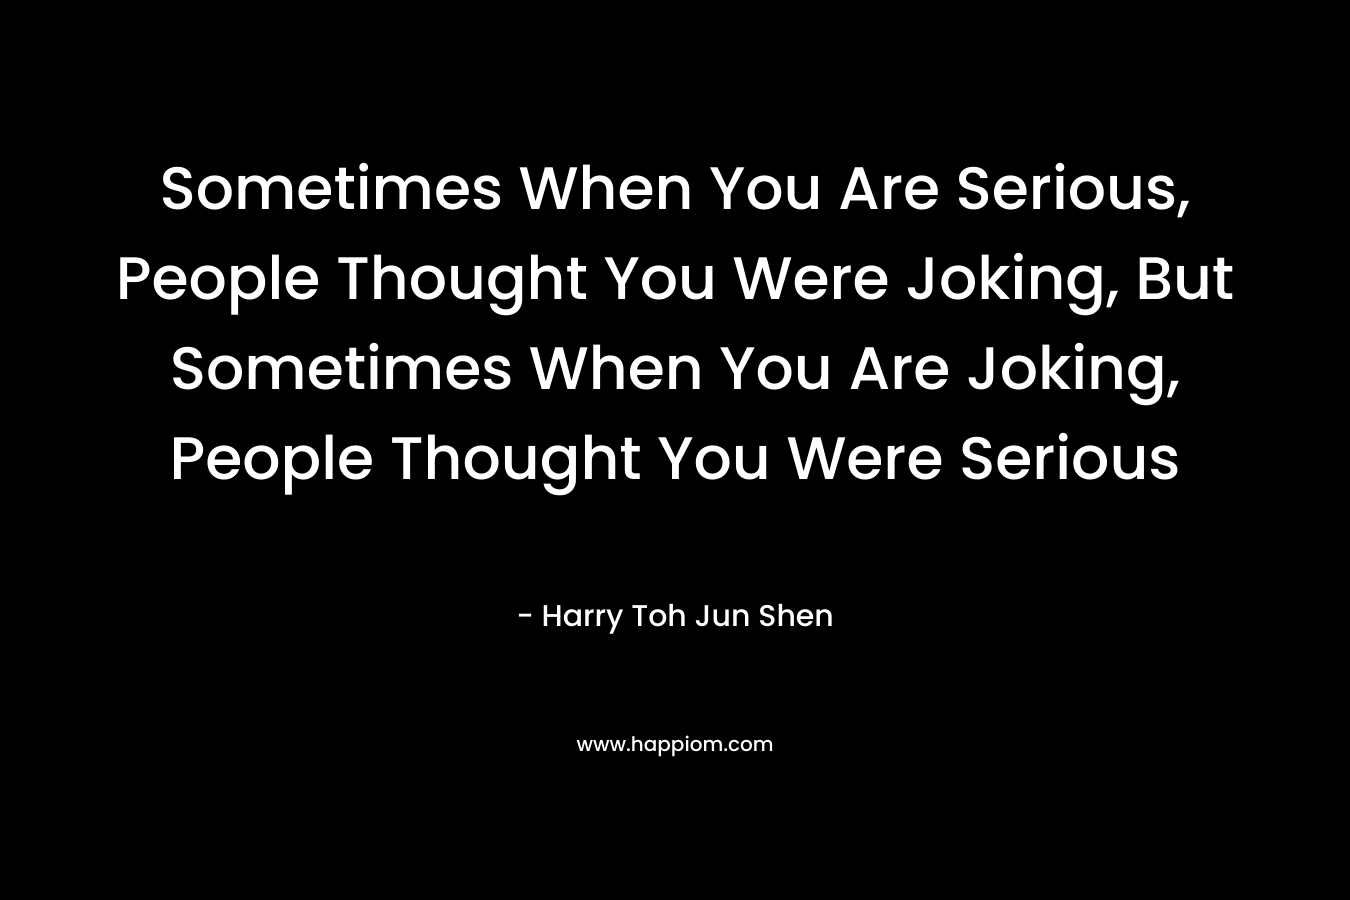 Sometimes When You Are Serious, People Thought You Were Joking, But Sometimes When You Are Joking, People Thought You Were Serious – Harry Toh Jun Shen